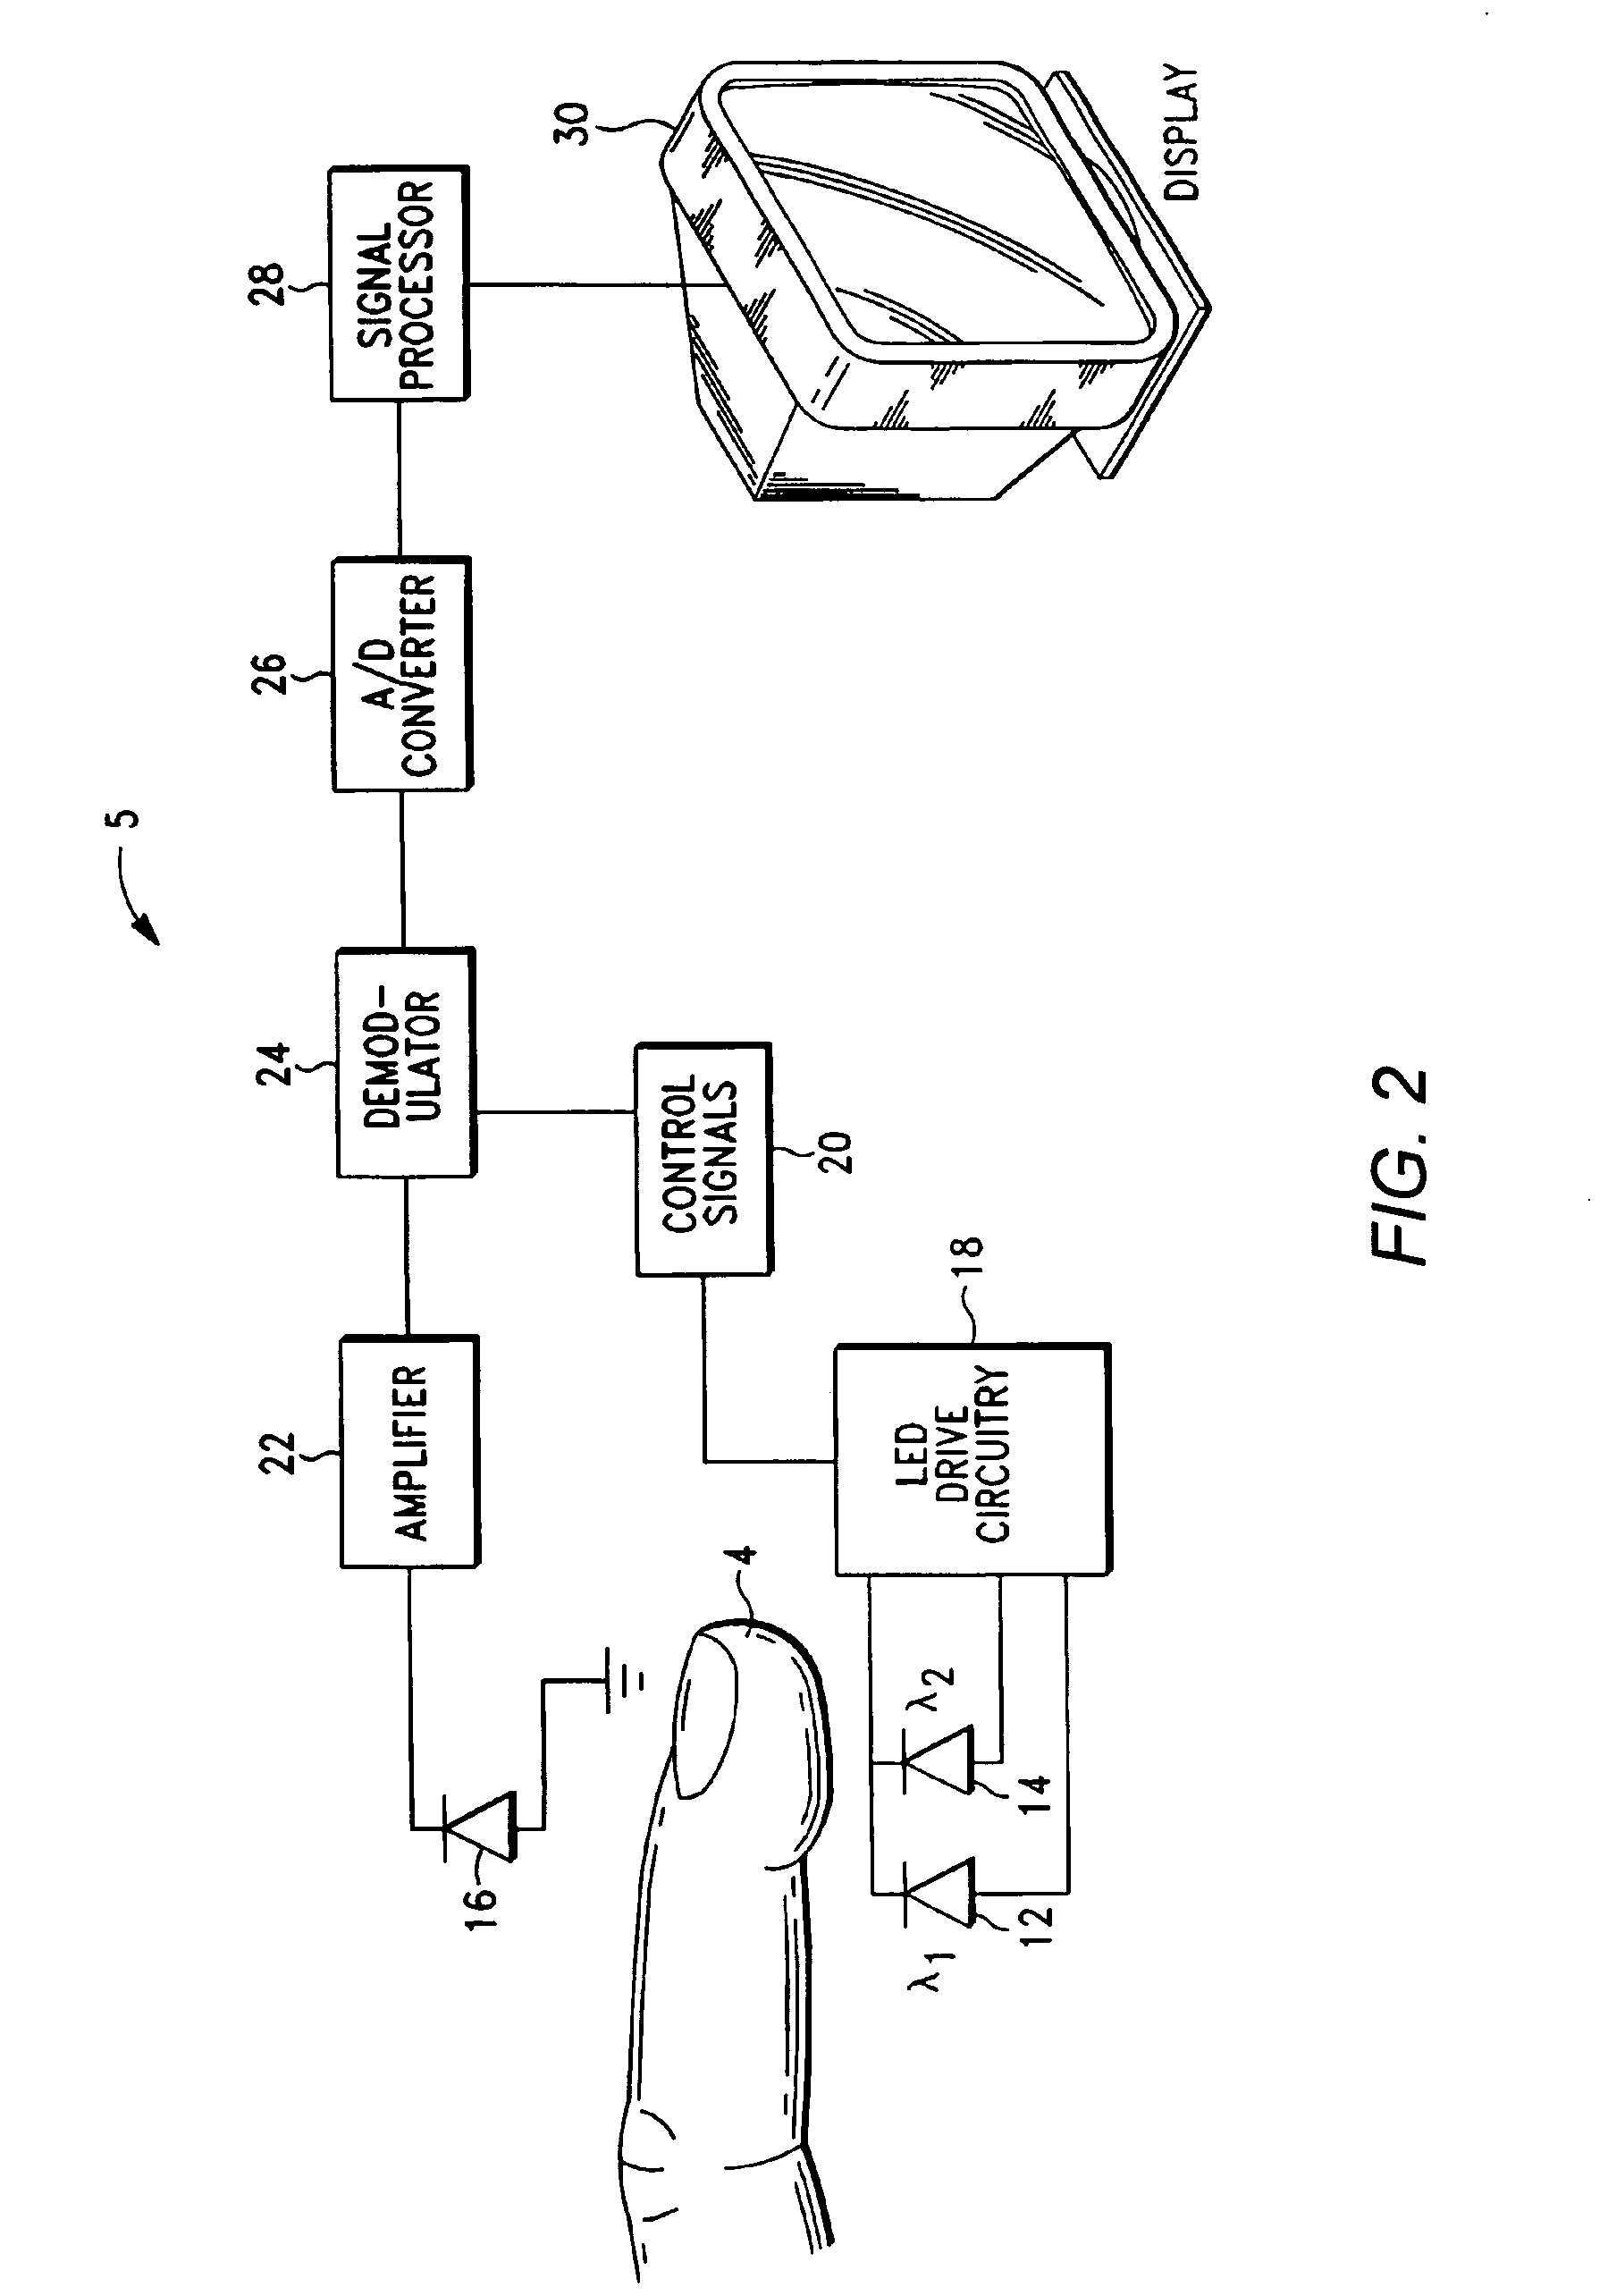 Method and apparatus for processing signals reflecting physiological characteristics